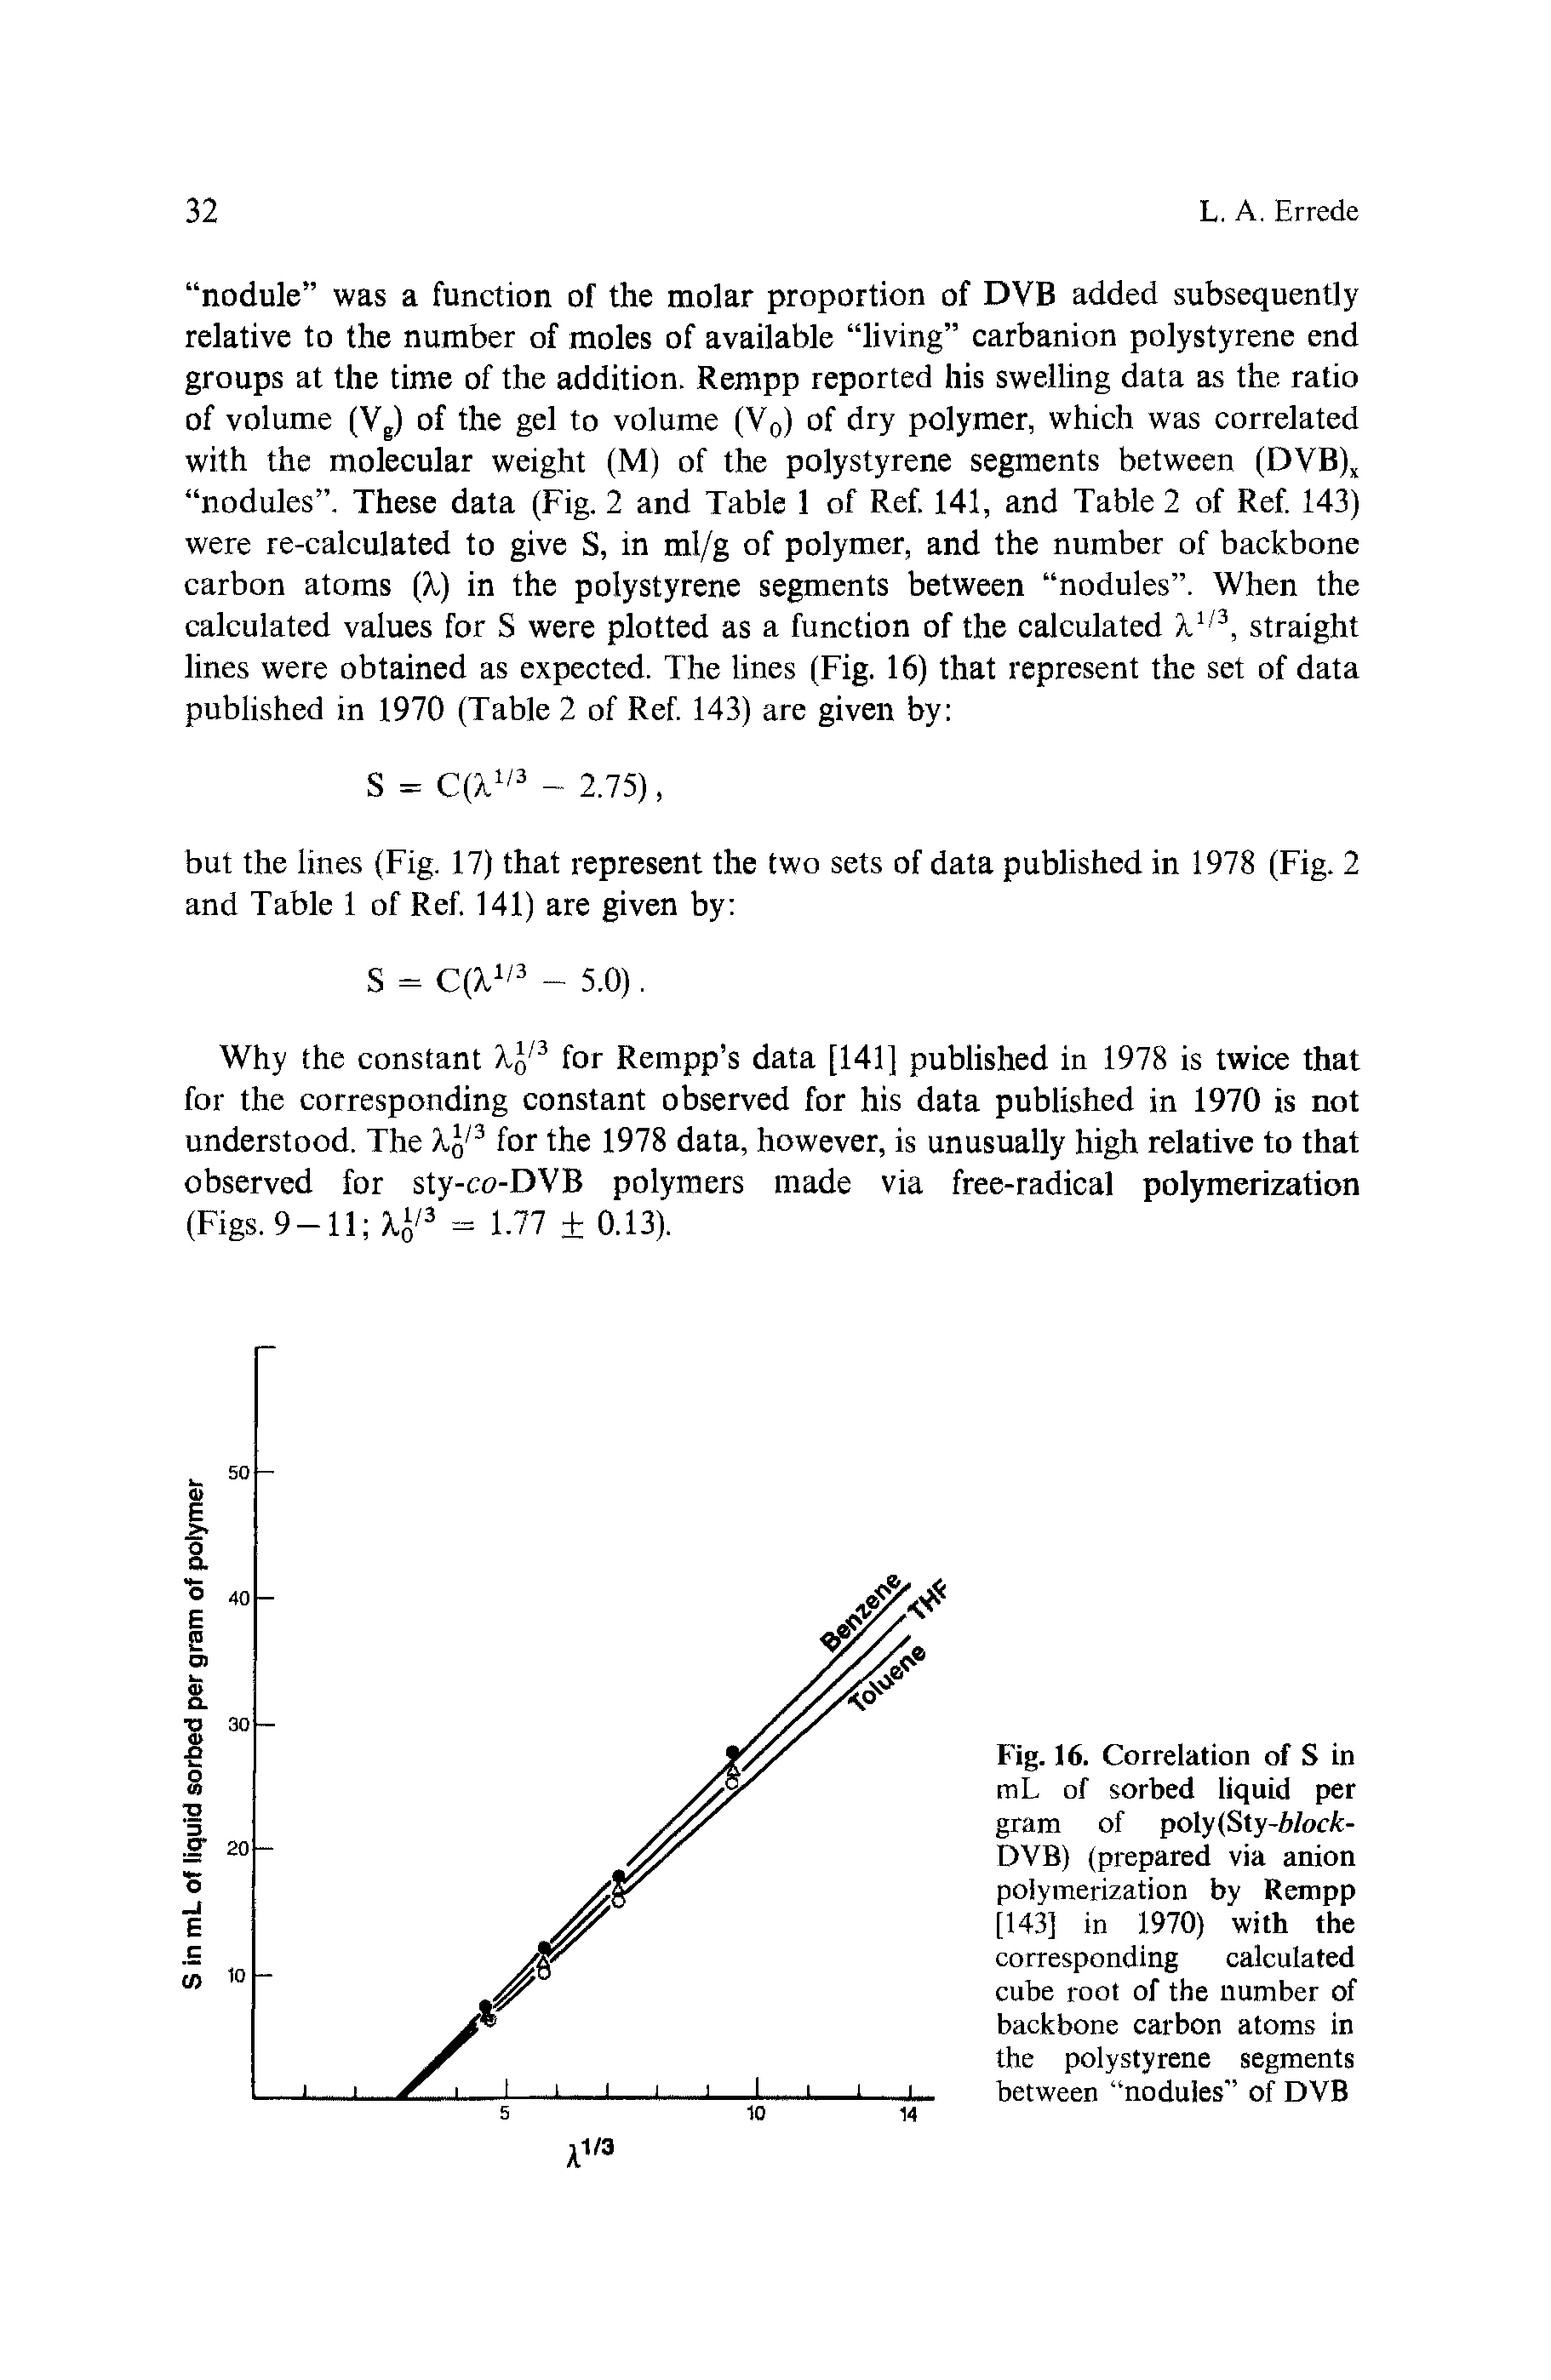 Fig. 16. Correlation of S in mL of sorbed liquid per gram of poly(Sty-Wock-DVB) (prepared via anion polymerization by Rempp [143] in 1970) with the corresponding calculated cube root of the number of backbone carbon atoms in the polystyrene segments between nodules of DVB...